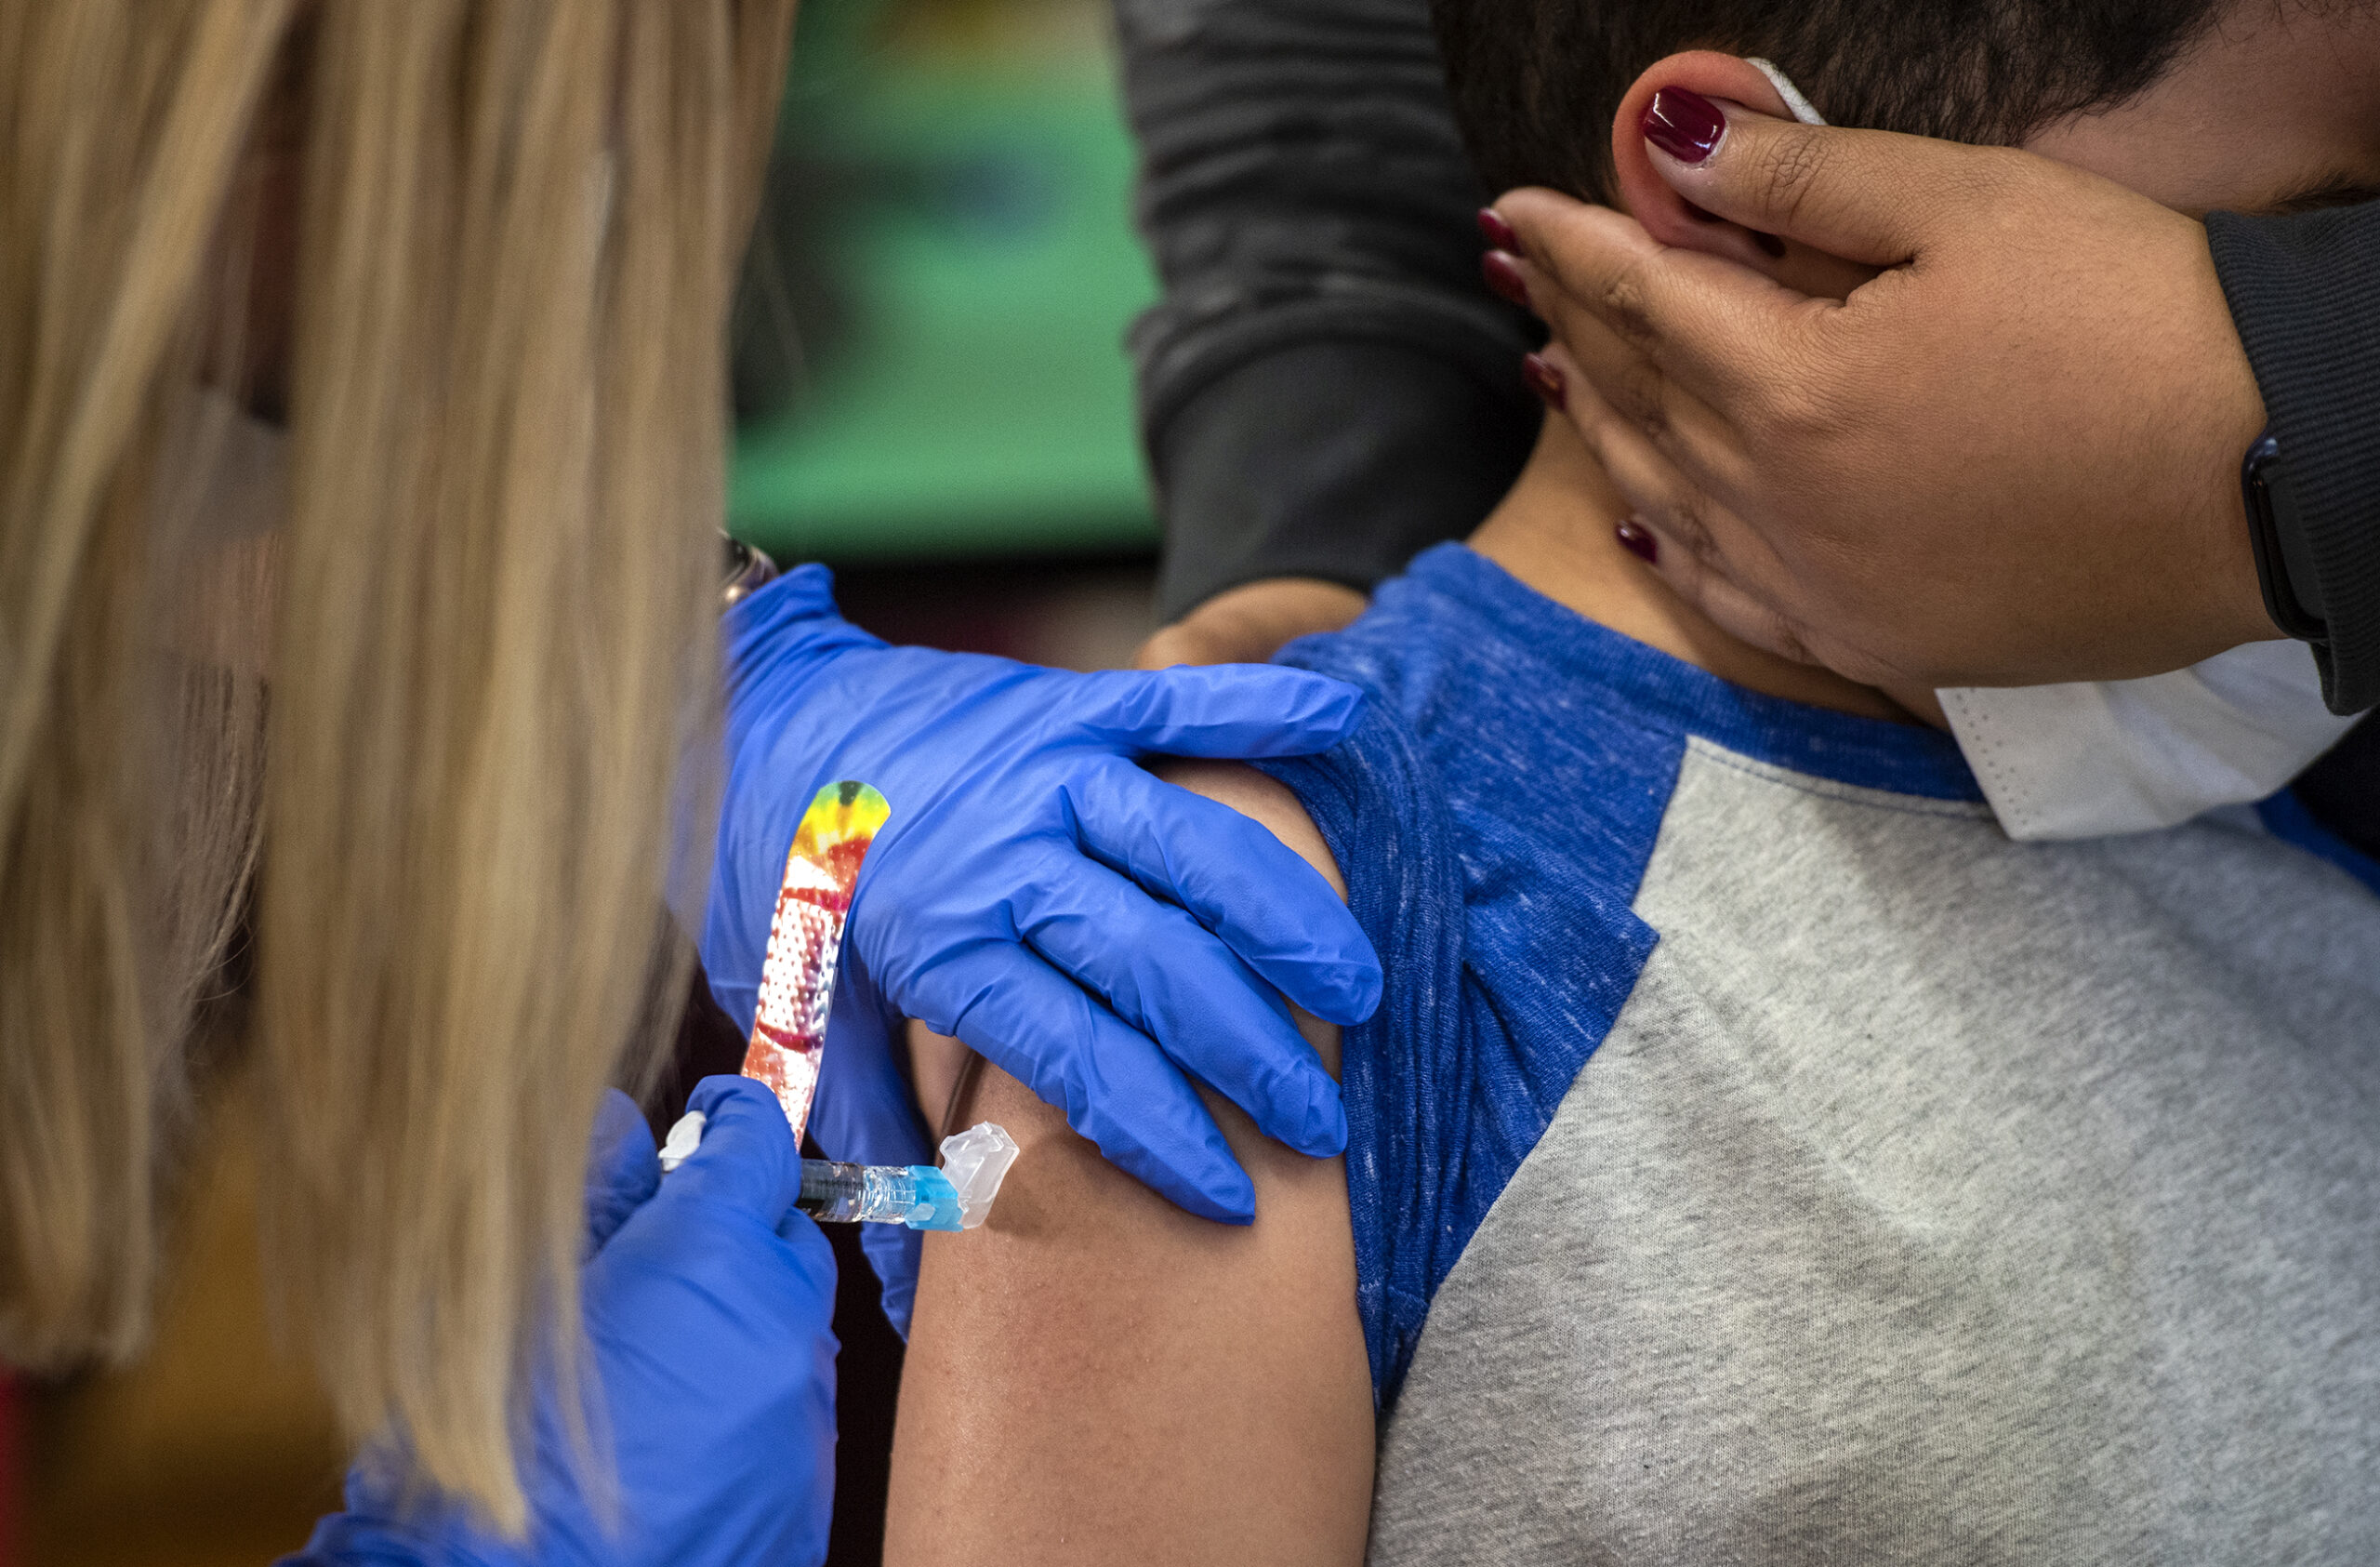 About 87K Wisconsin children have gotten COVID-19 vaccine, but some vaccinated parents are still hesitant when it comes to their kids